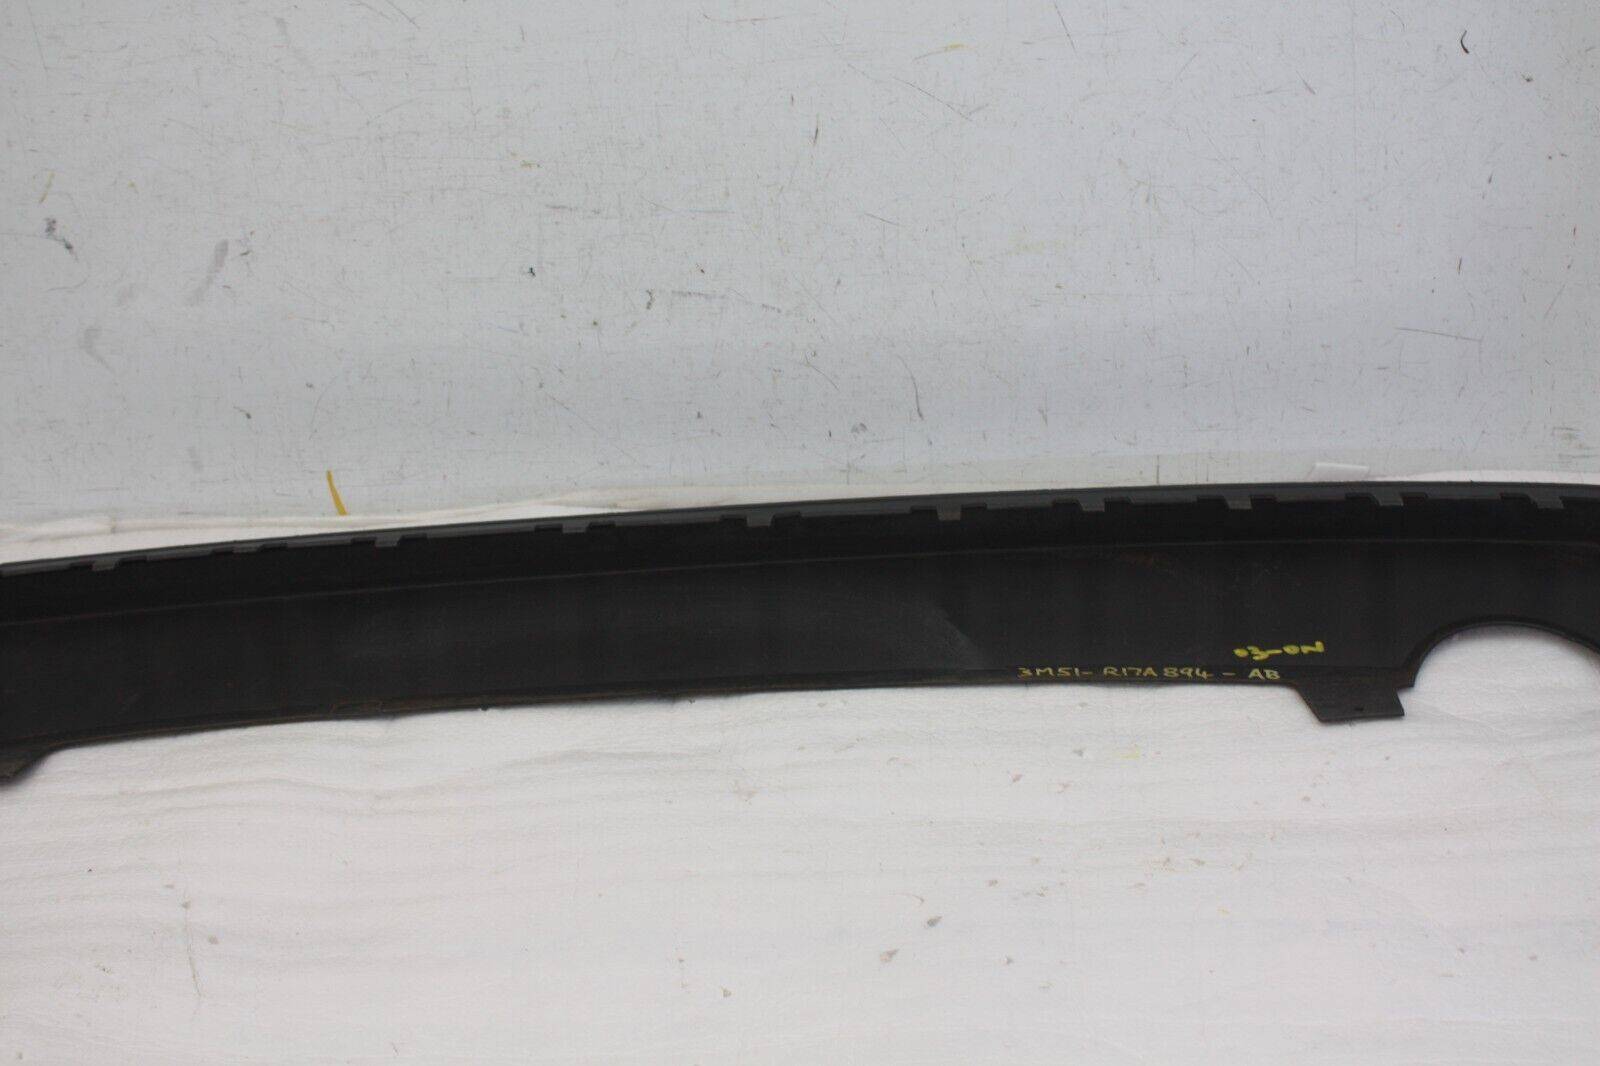 Ford-C-Max-Rear-Bumper-Lower-Section-2004-TO-2007-3M51-R17A894-AB-Genuine-176384482686-16